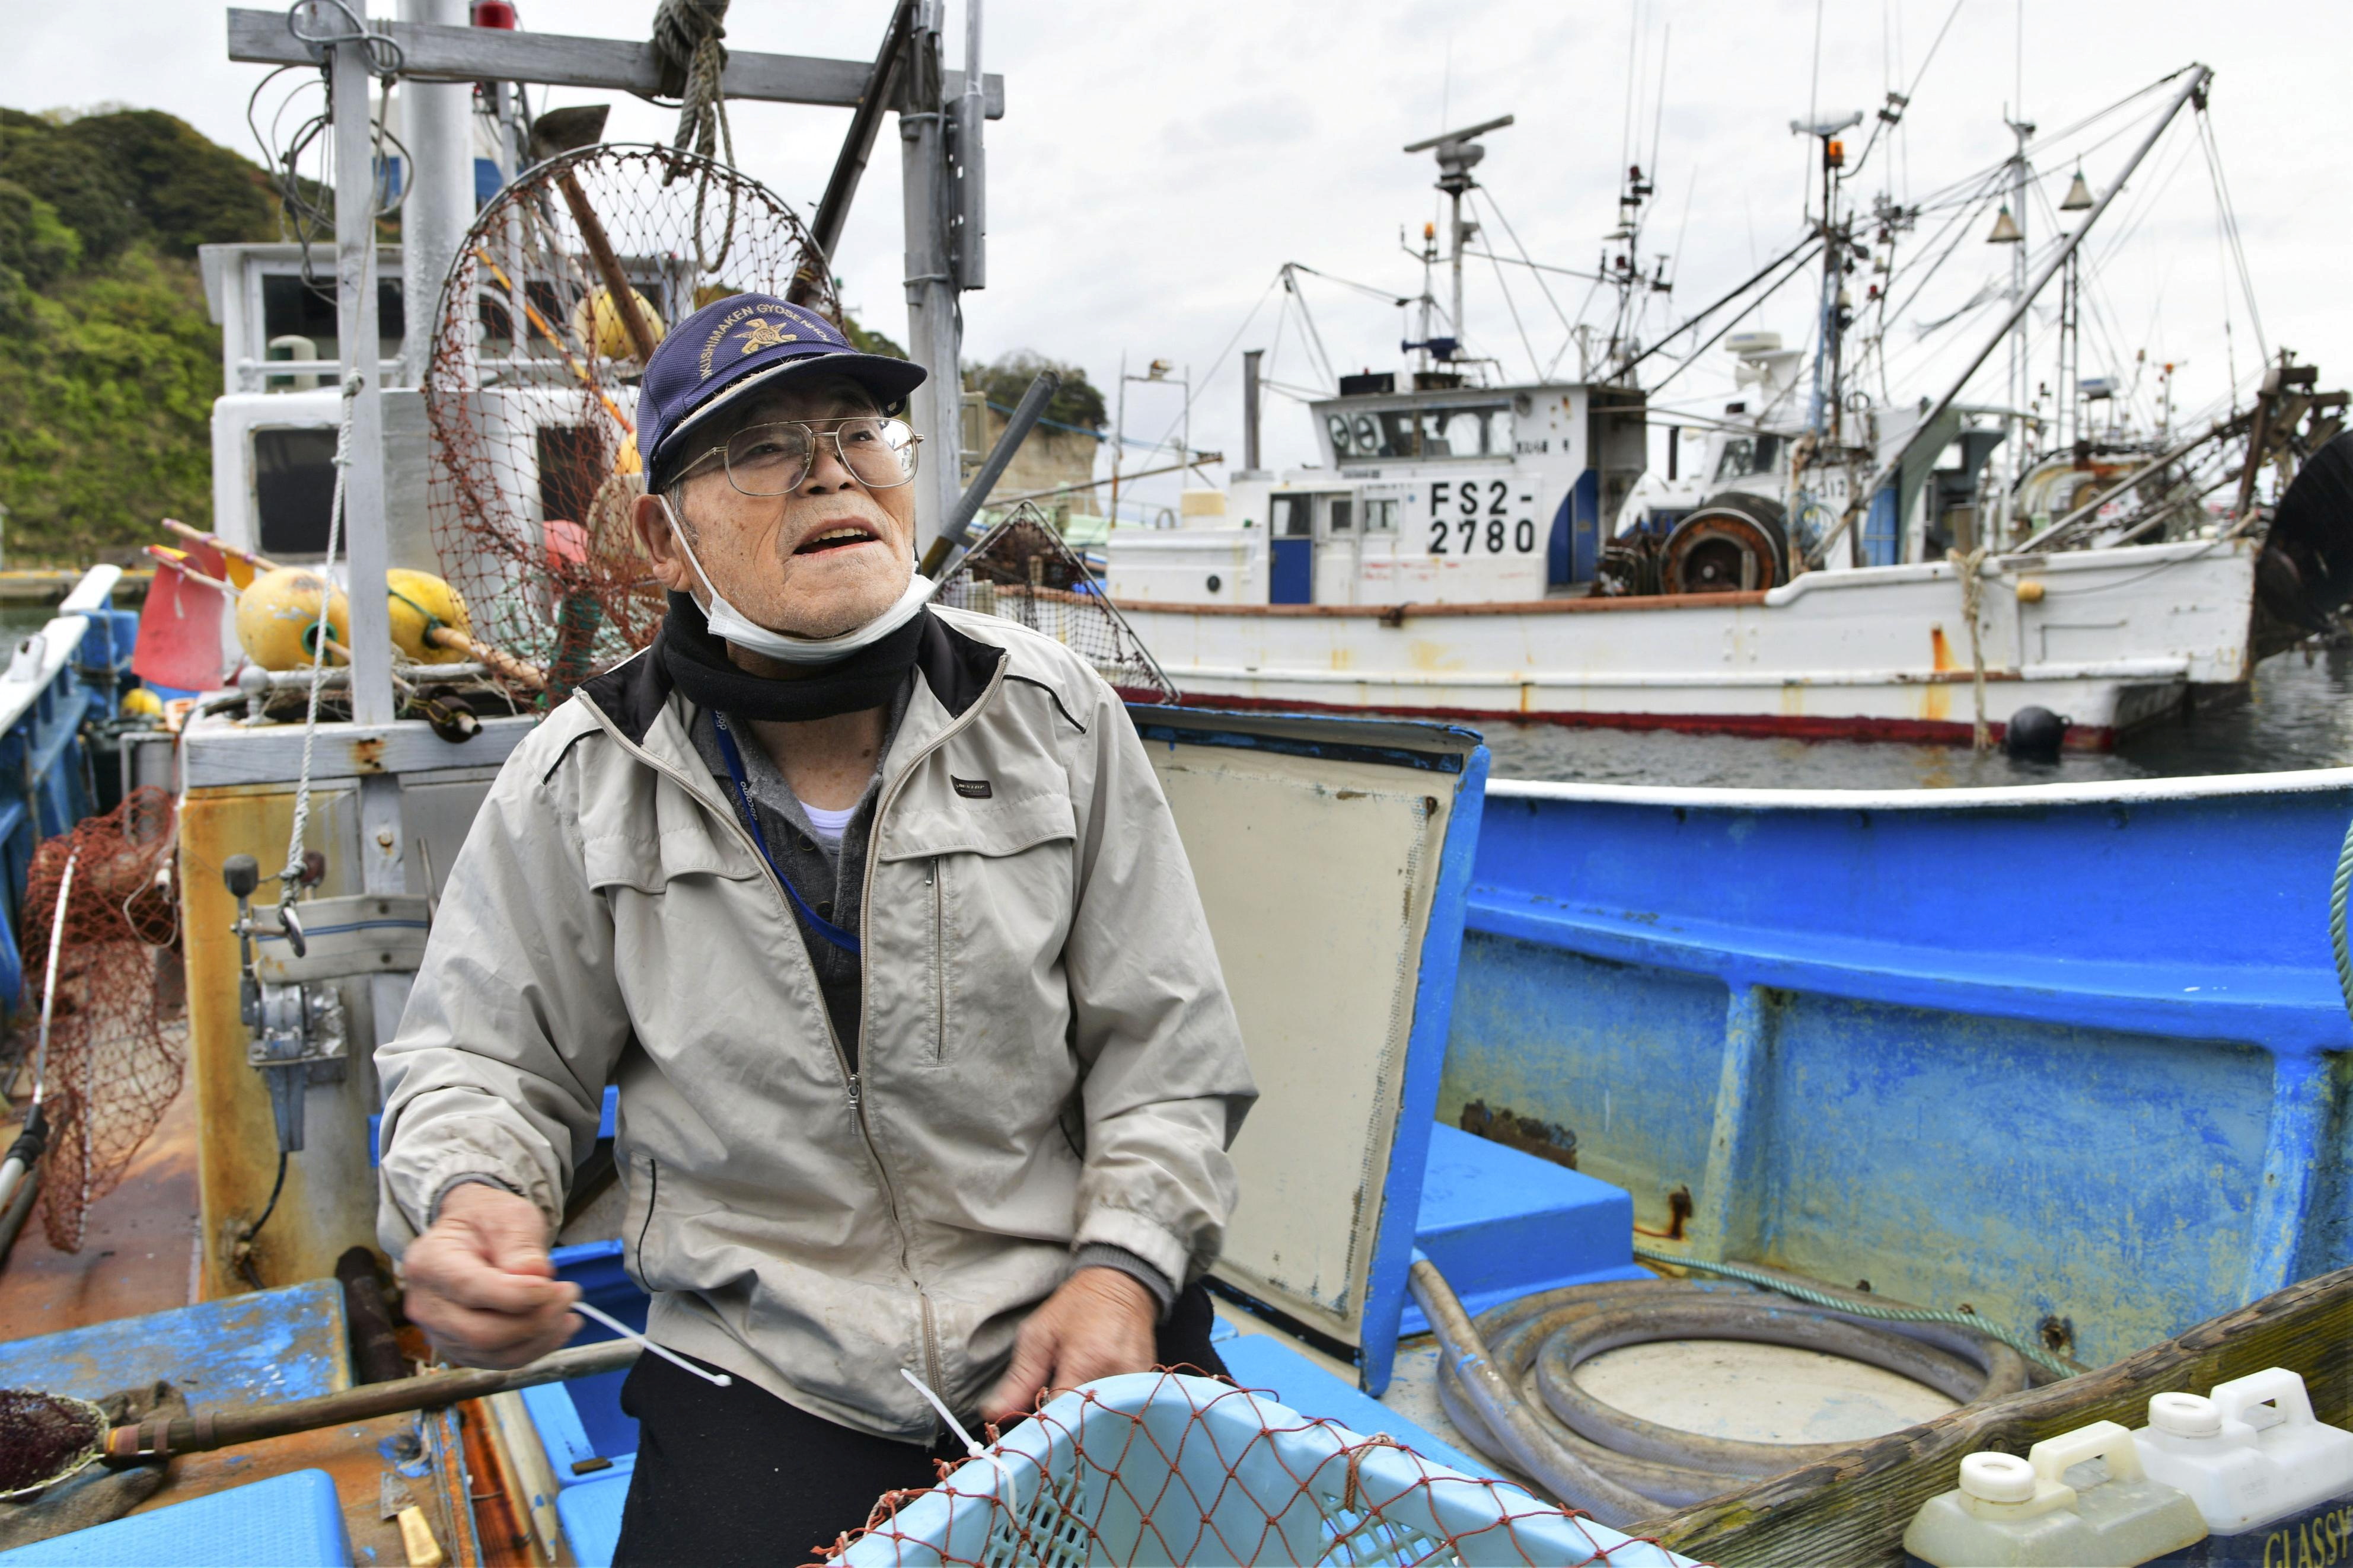 A fisherman is seen on the boat after a fishing operation at a port in Iwaki, Fukushima prefecture